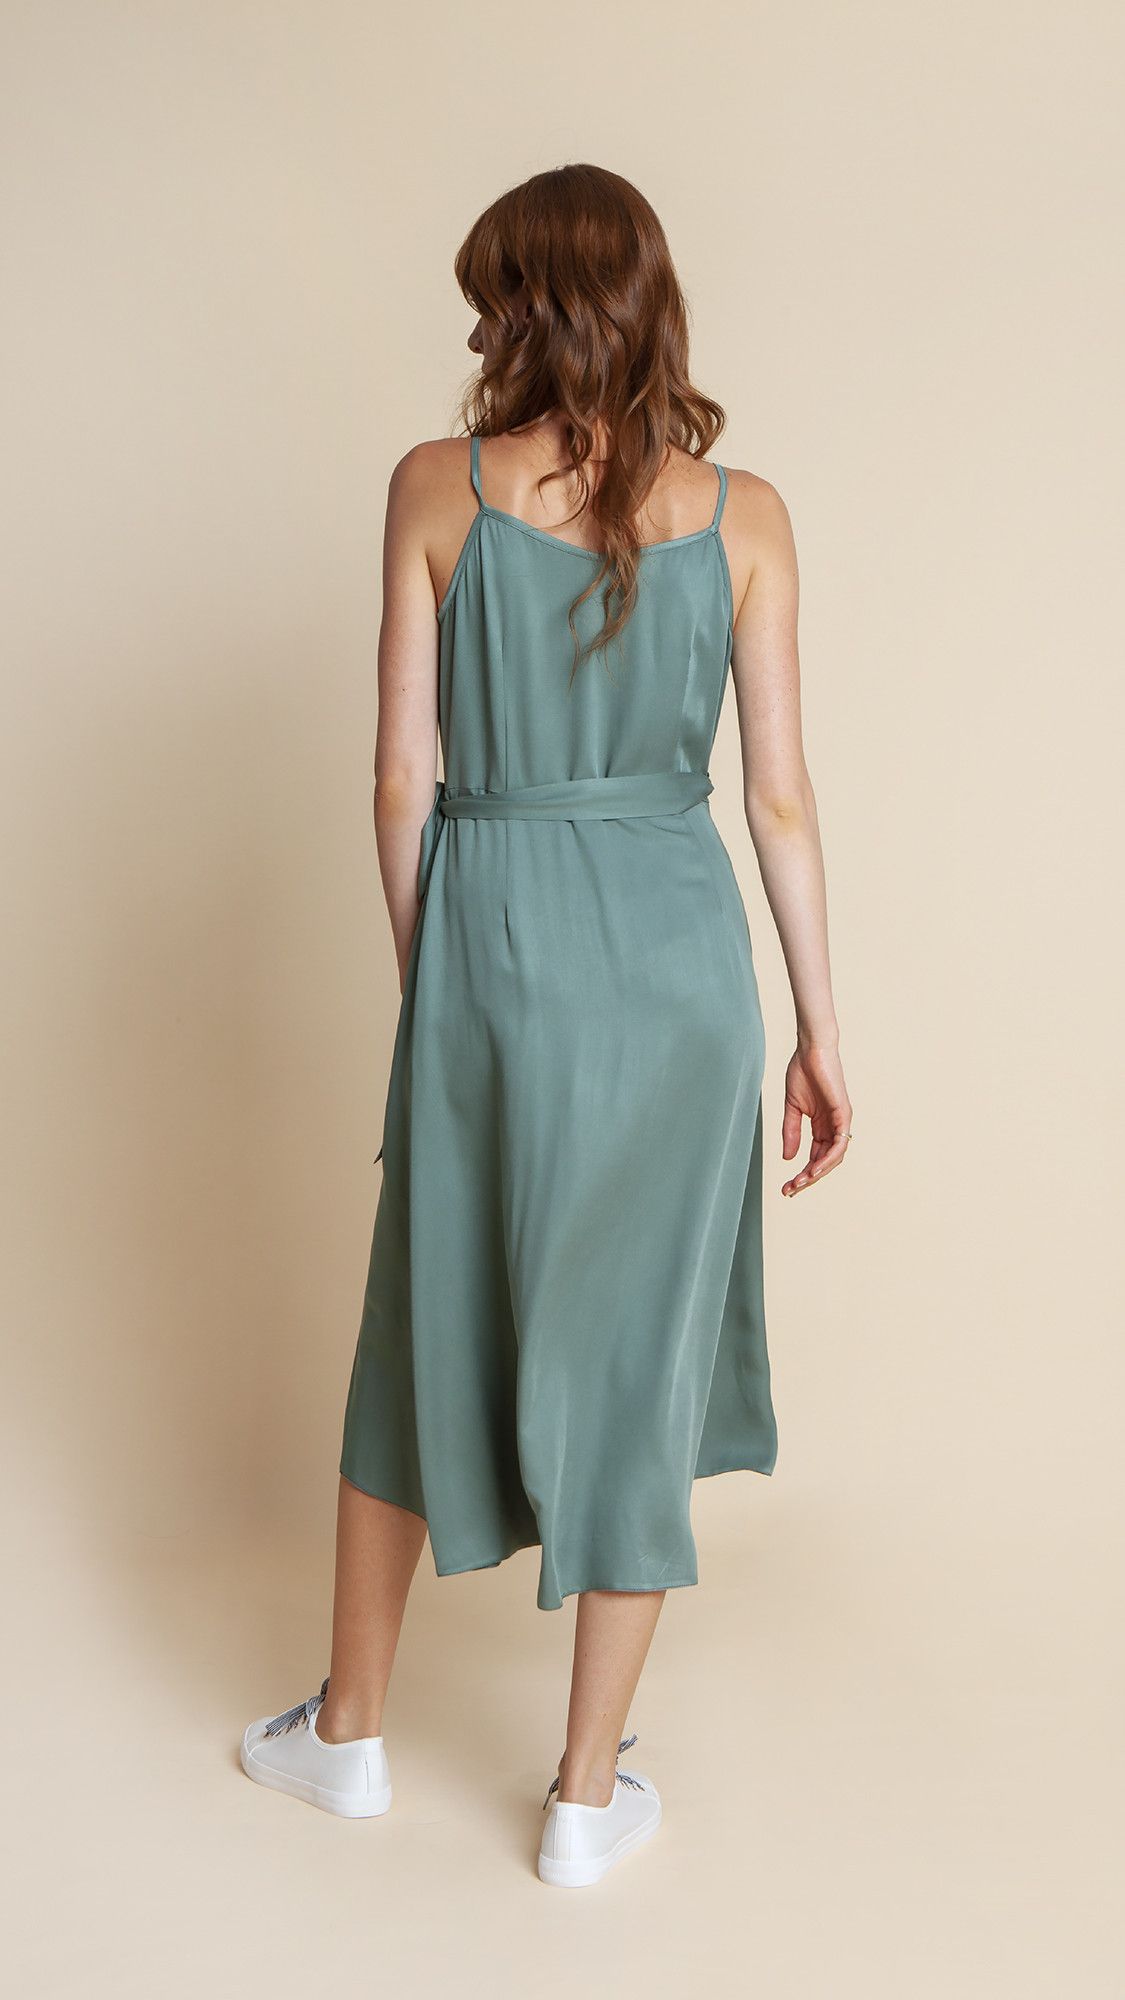 Blanca is: a dress with shoulder straps with an envelope cut and midi length. It has a belt that you can adjust the waist size. It is slightly flared below the hip line, it has hidden pockets. It was made of high-quality viscose in powder pink, pastel green, black and white with floral prints. Airy and incredibly feminine.